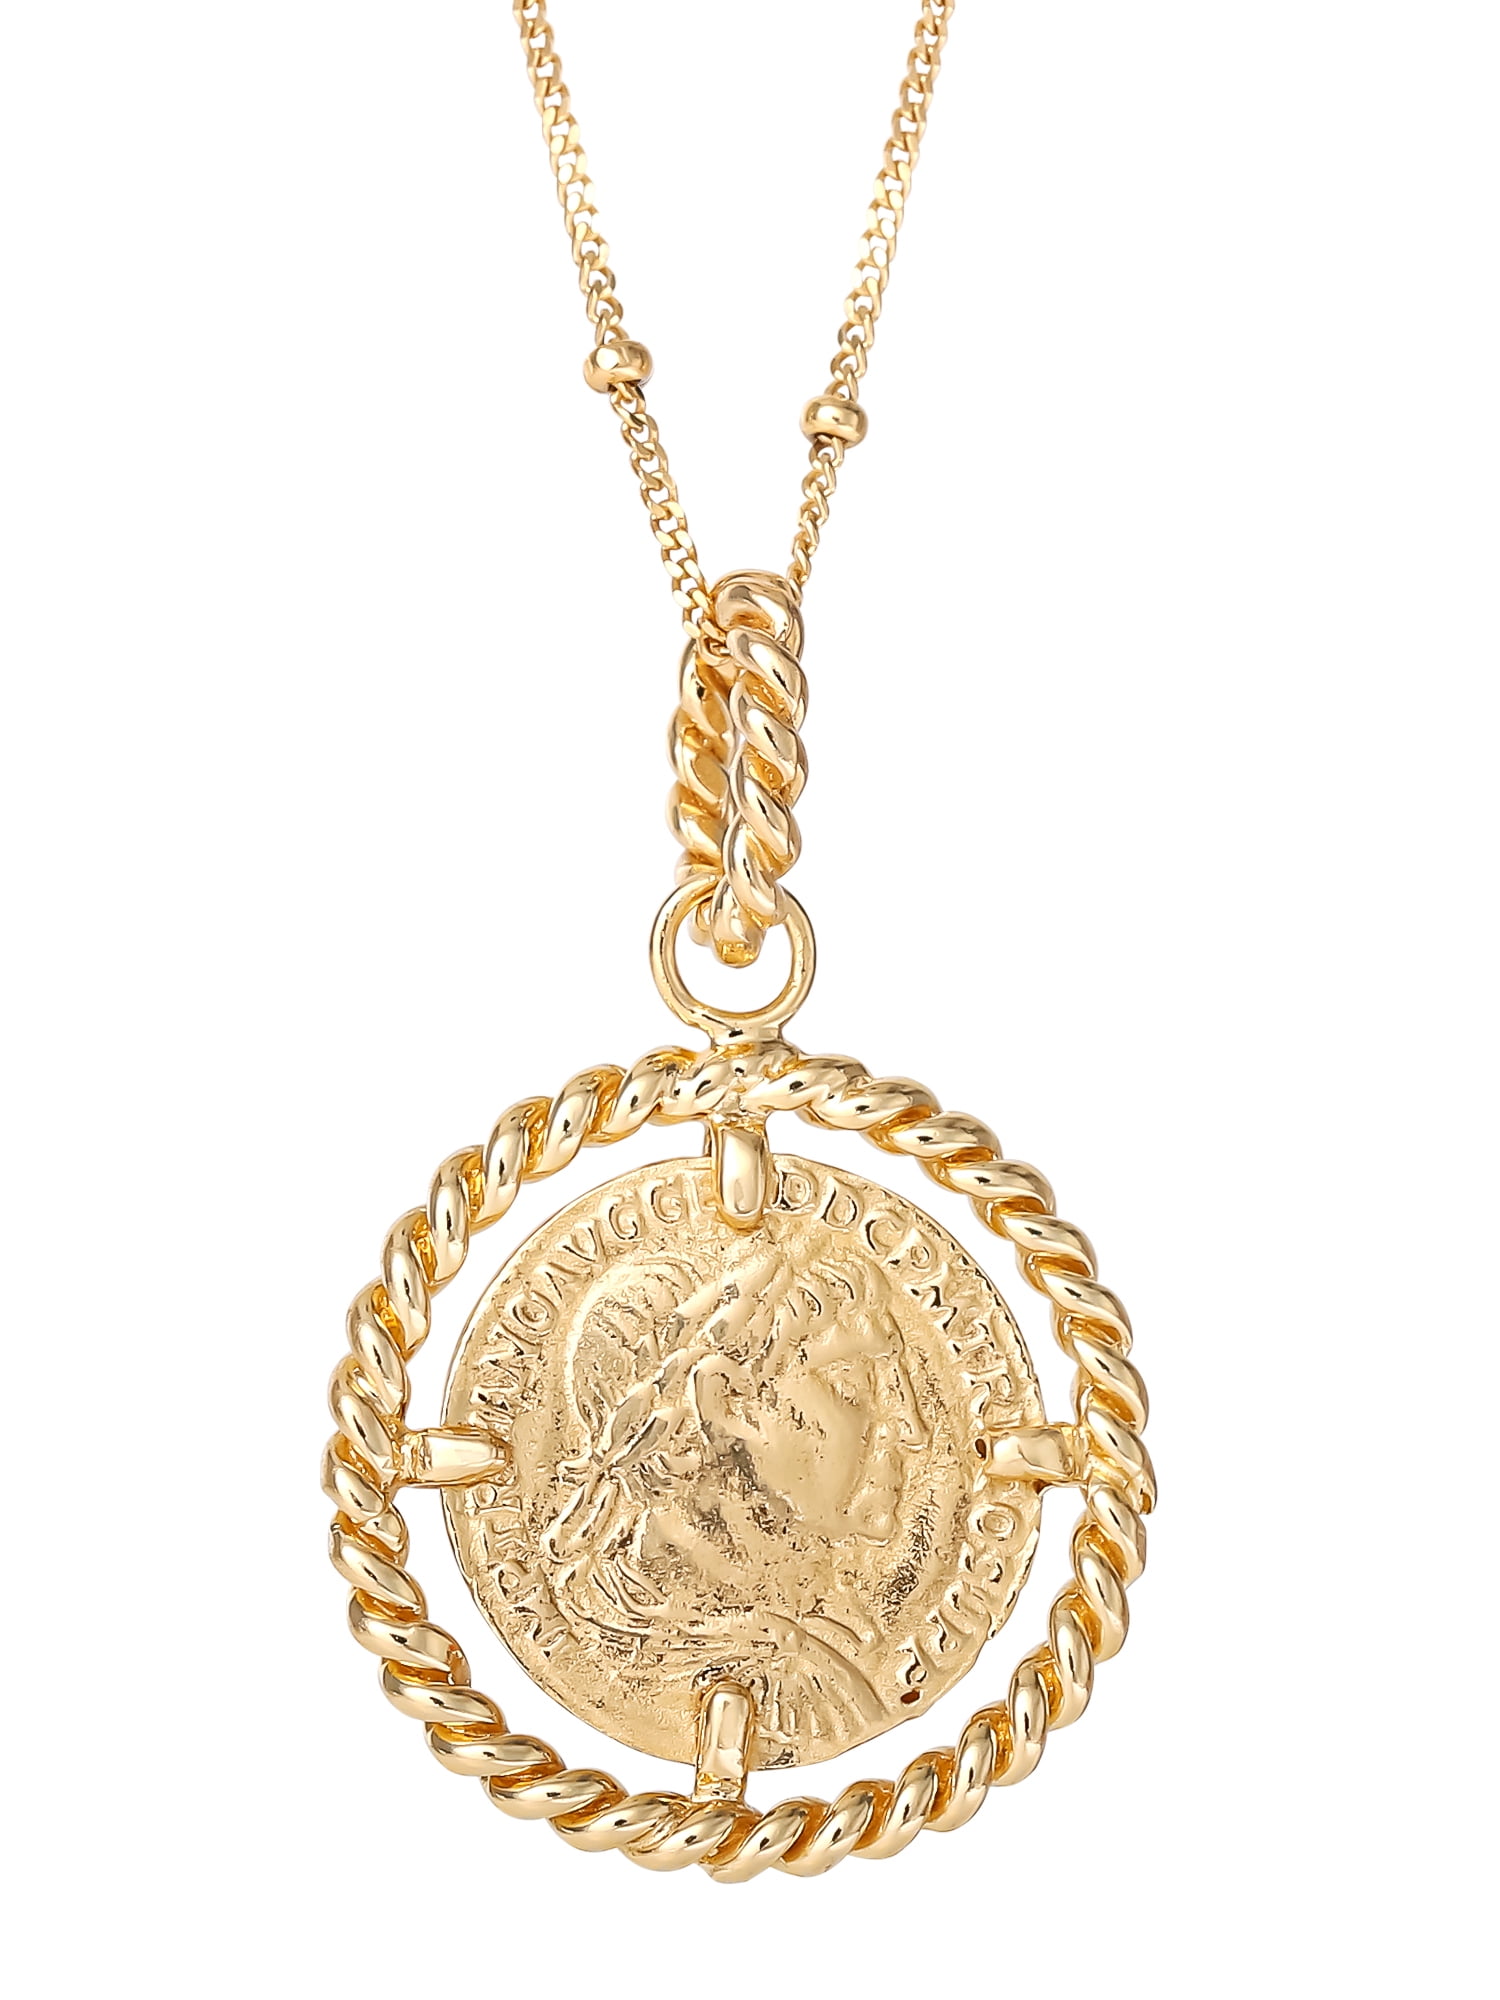 Siren Small and Large Coin Necklace Set | Jewellery Sets | Monica Vinader